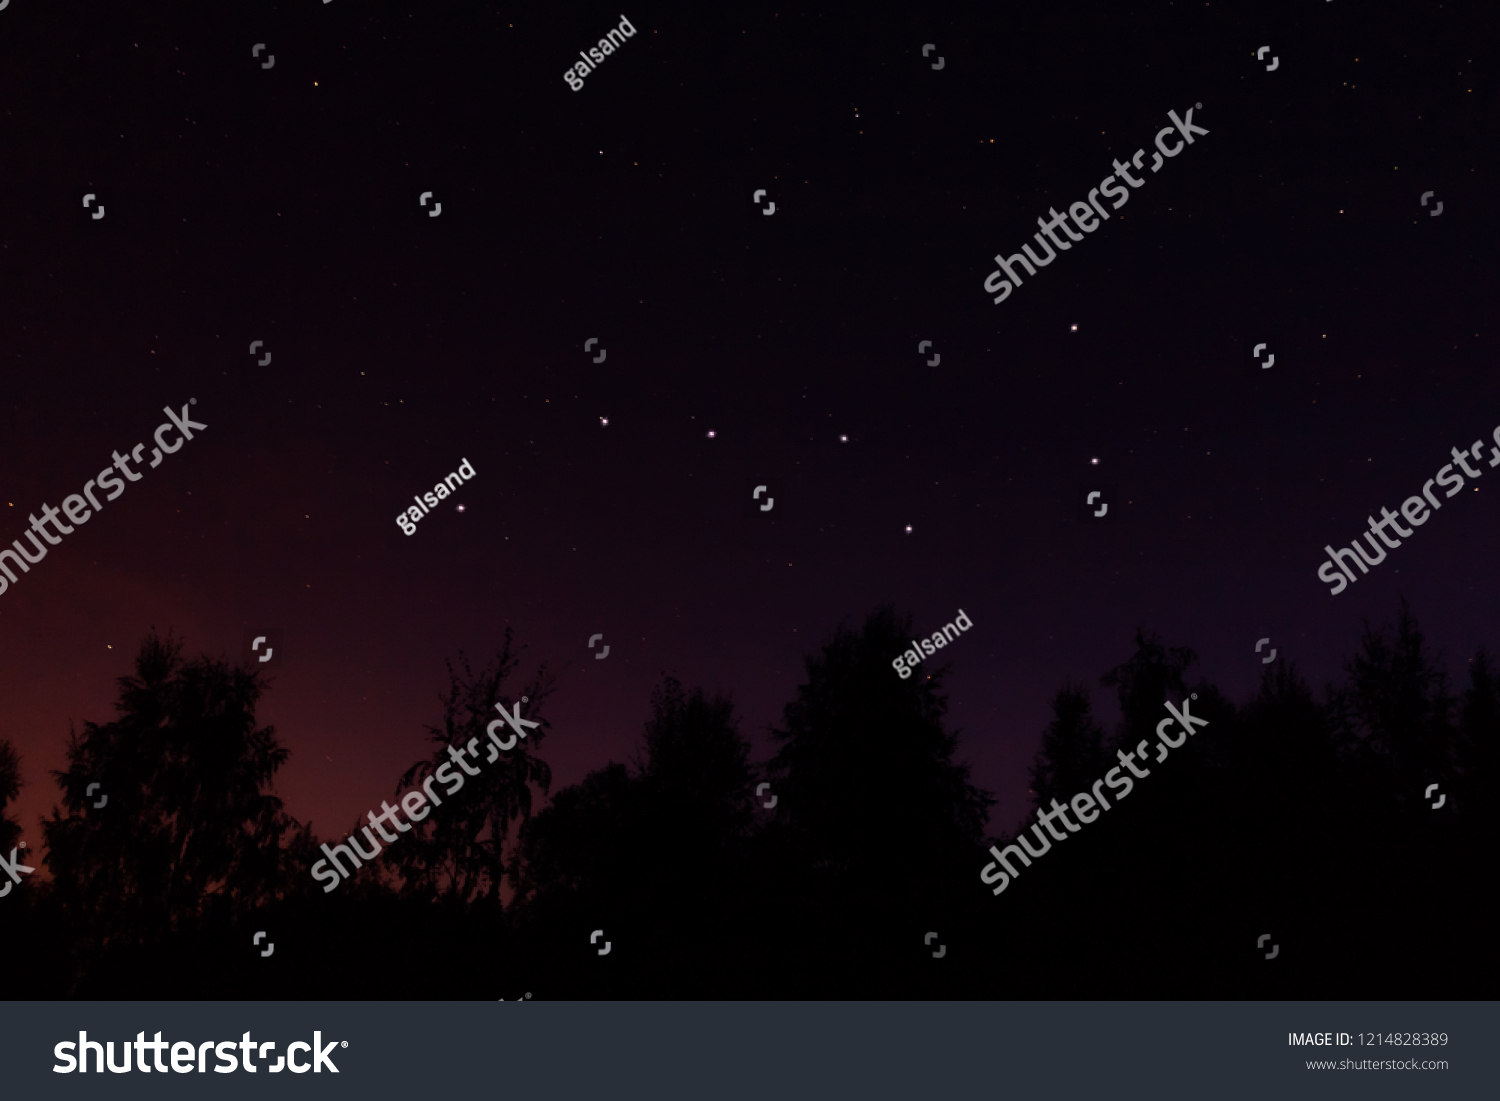 Constellation Ursa Major (big dipper or Great Bear) in the night starry sky #1214828389